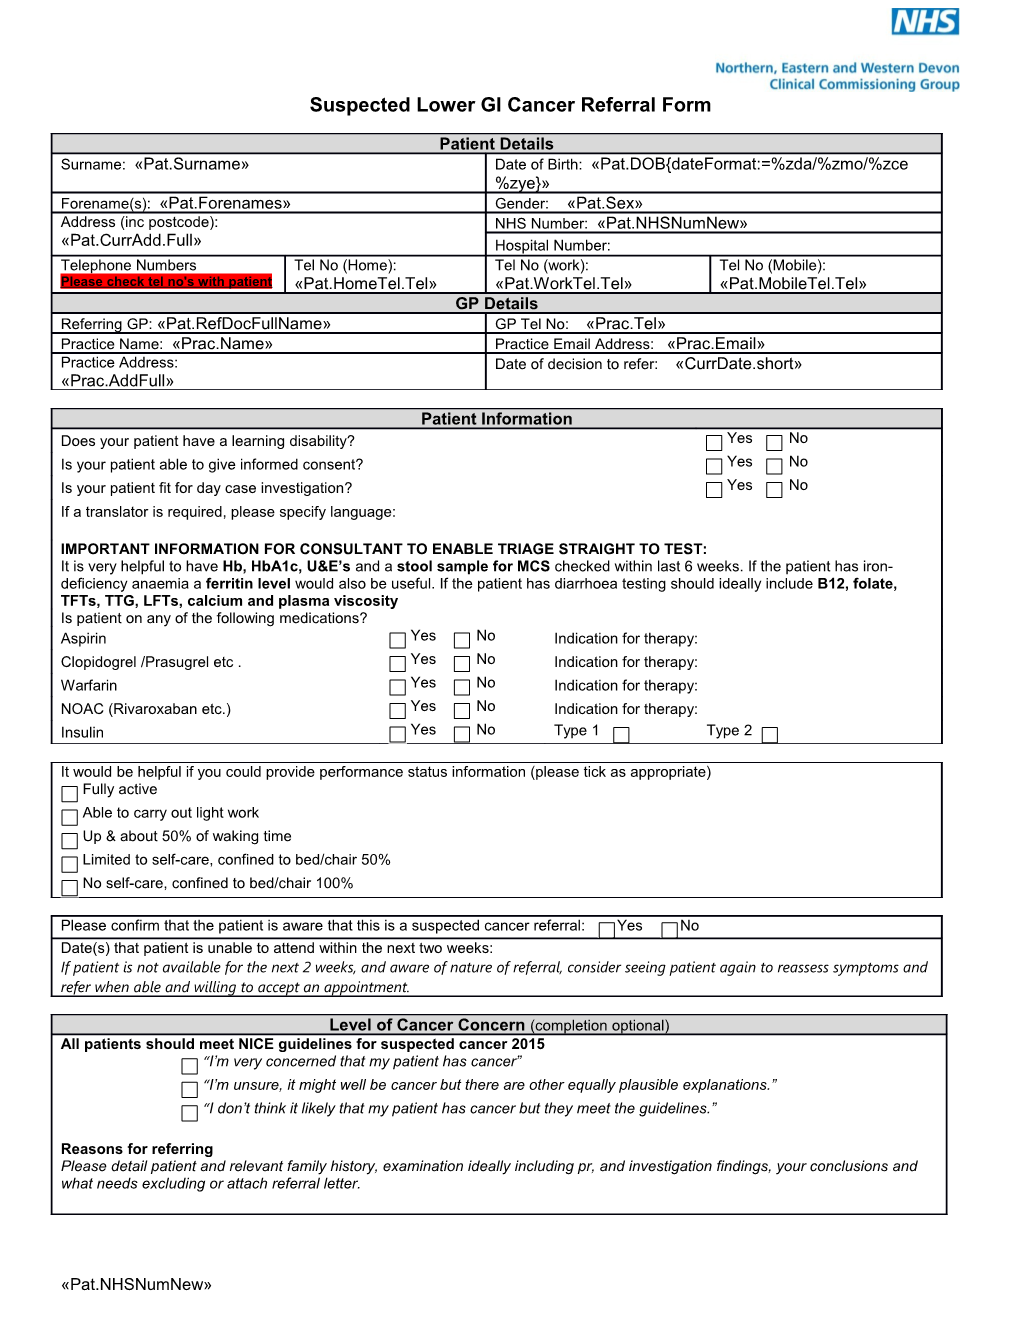 Suspected Lower GI Cancer Referral Form